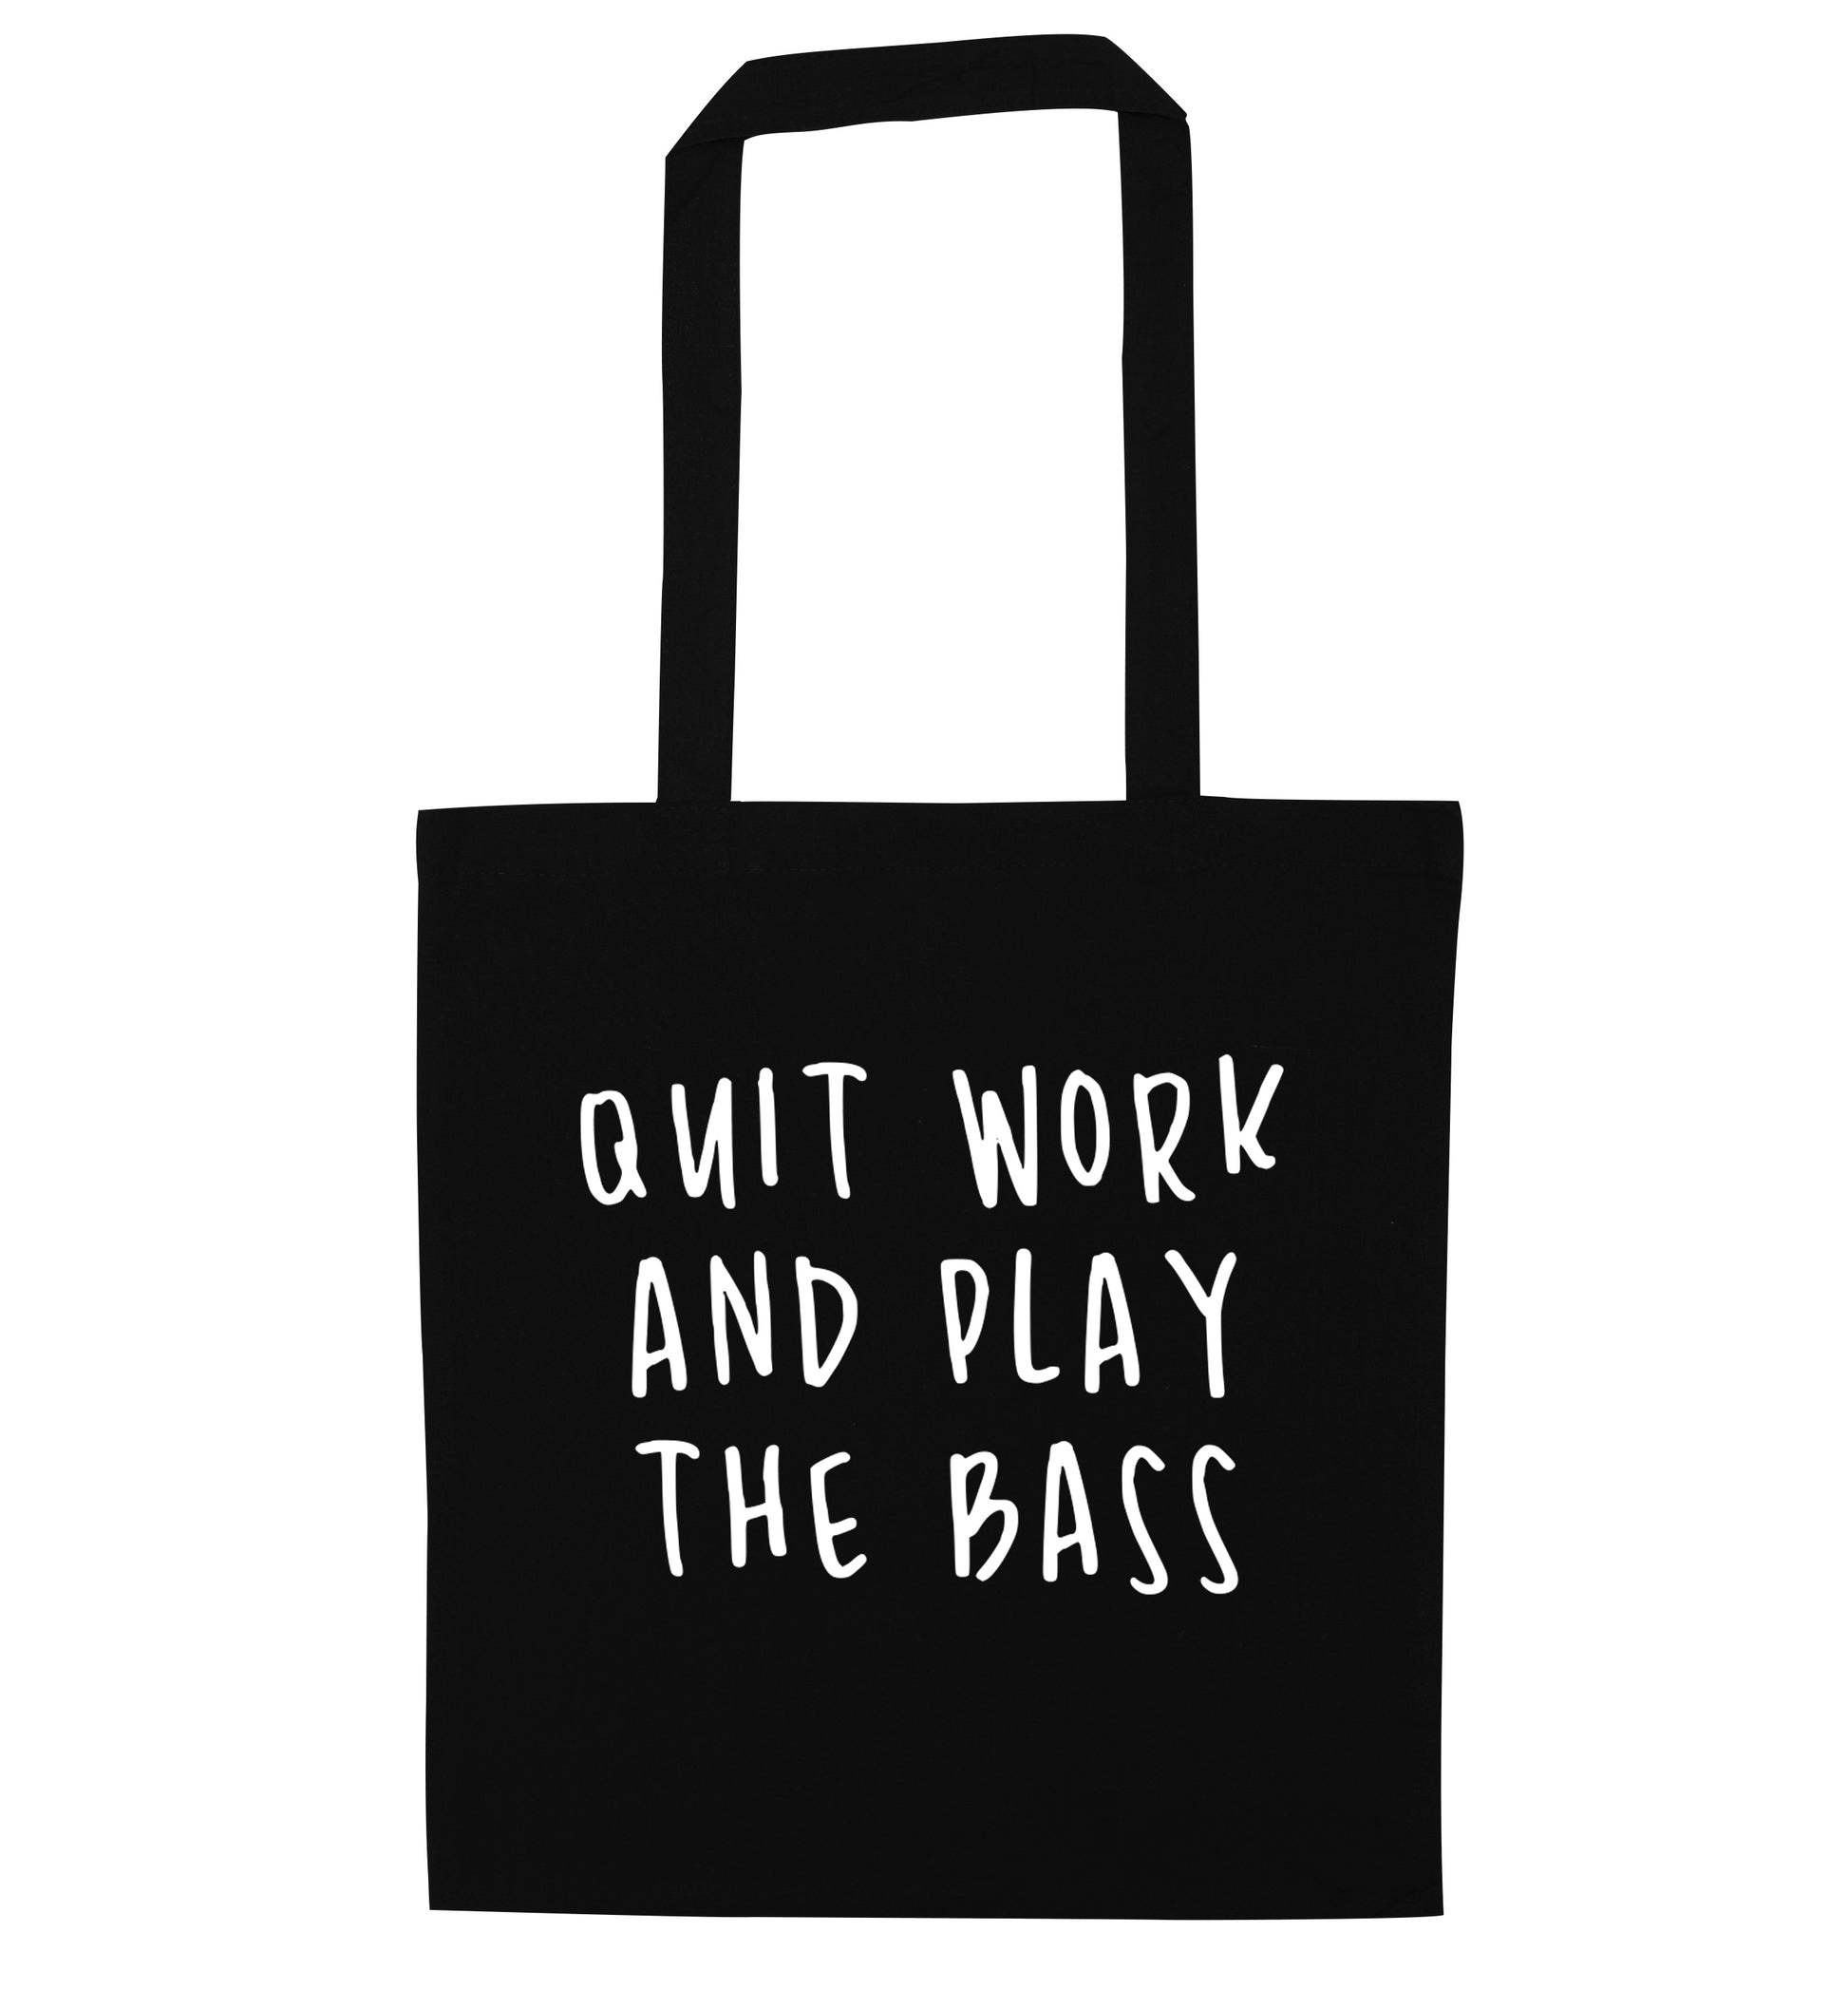 Quit work and play the bass black tote bag